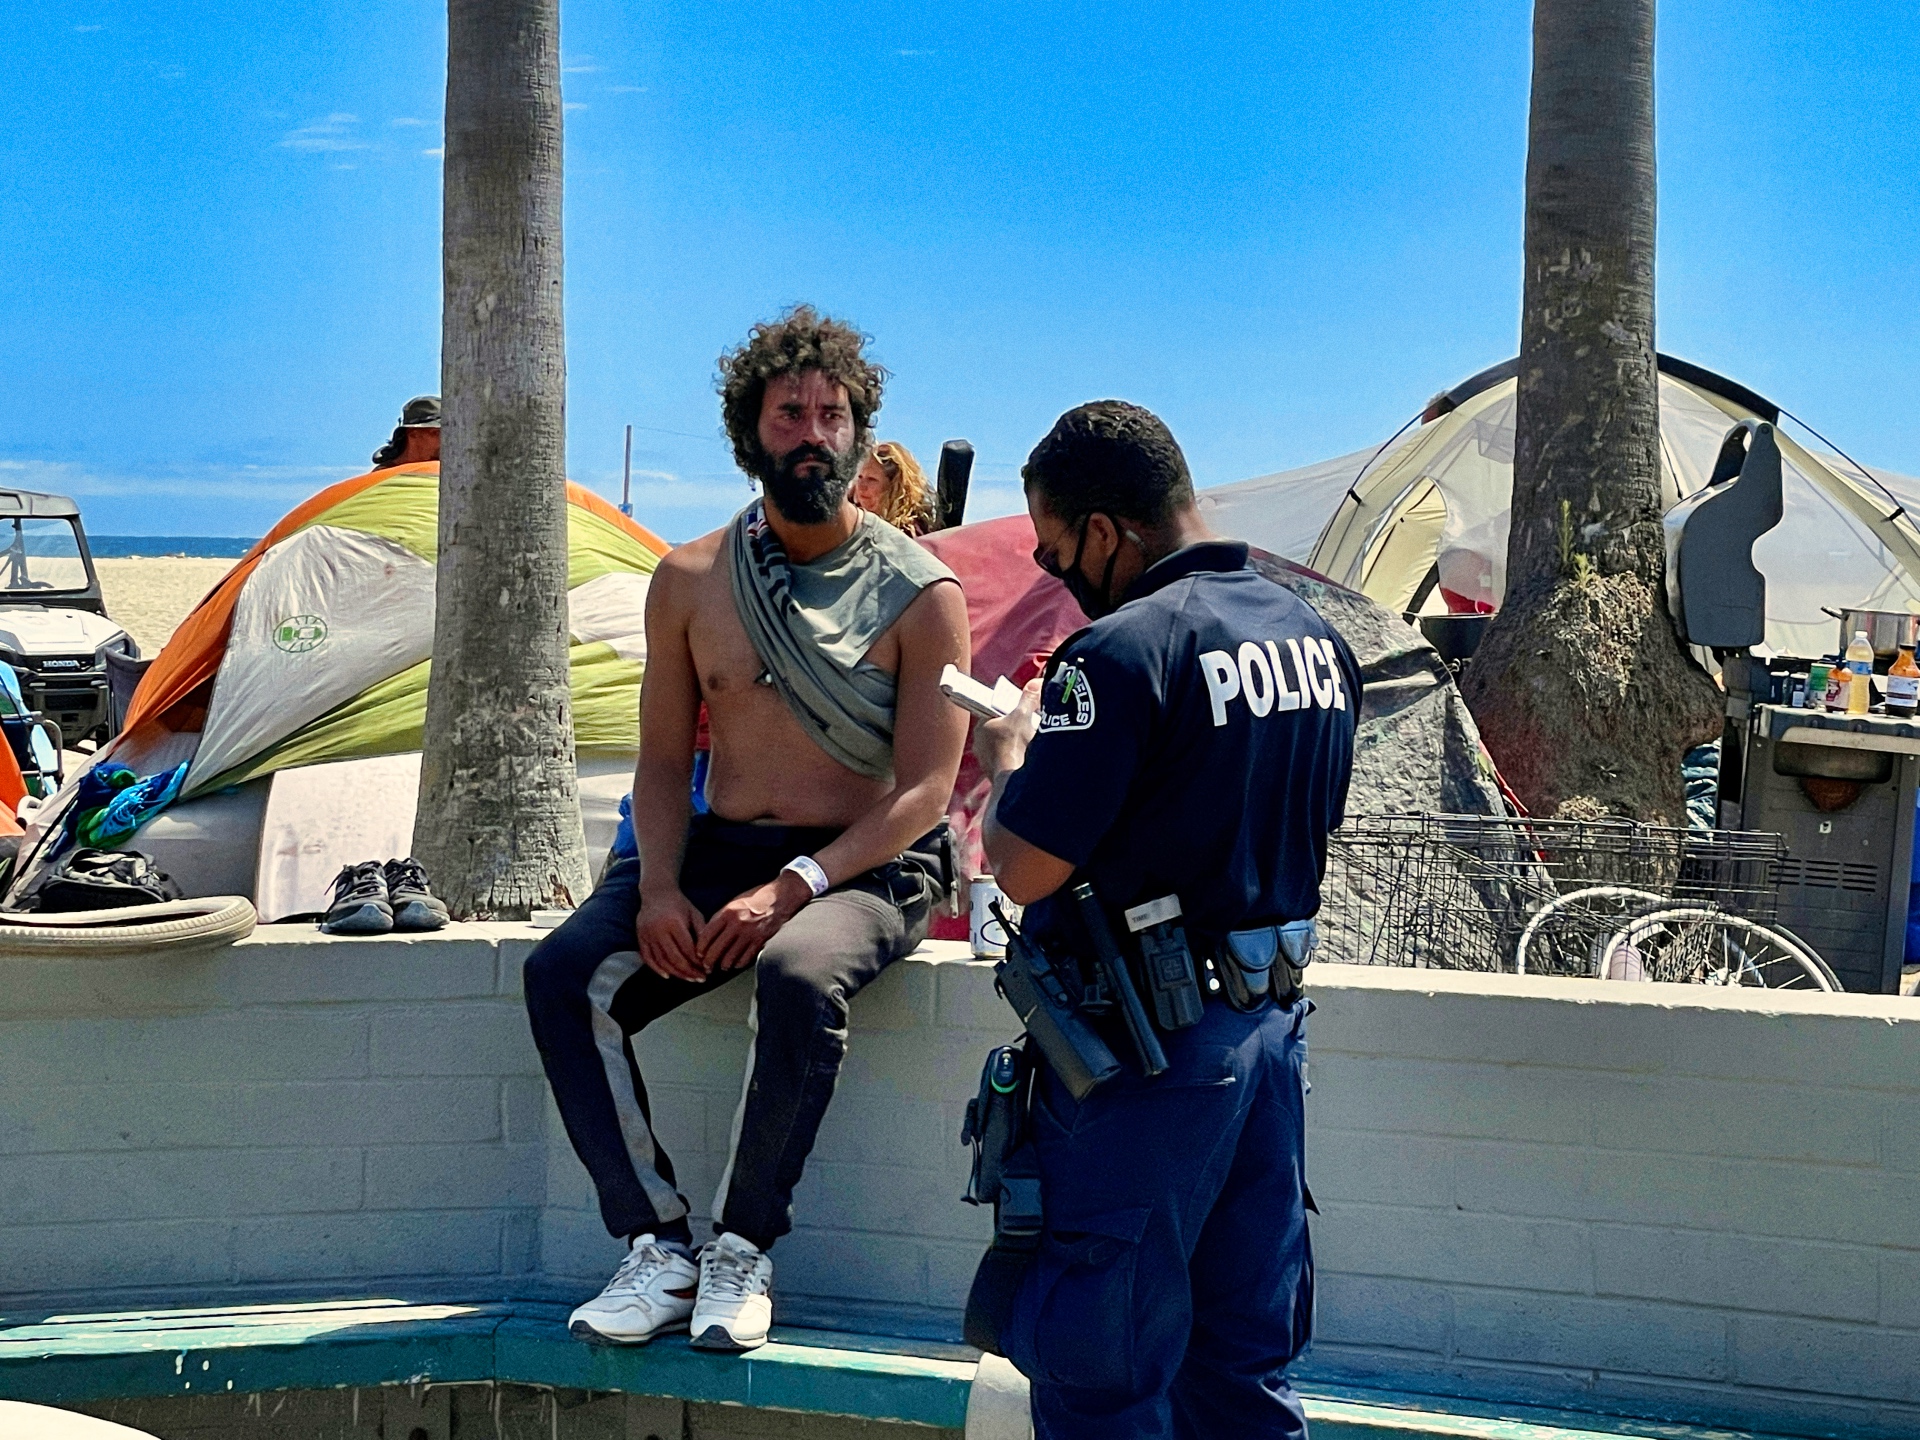 A man not wearing a shirt sits on a short wall while a police officer writes him a ticket.